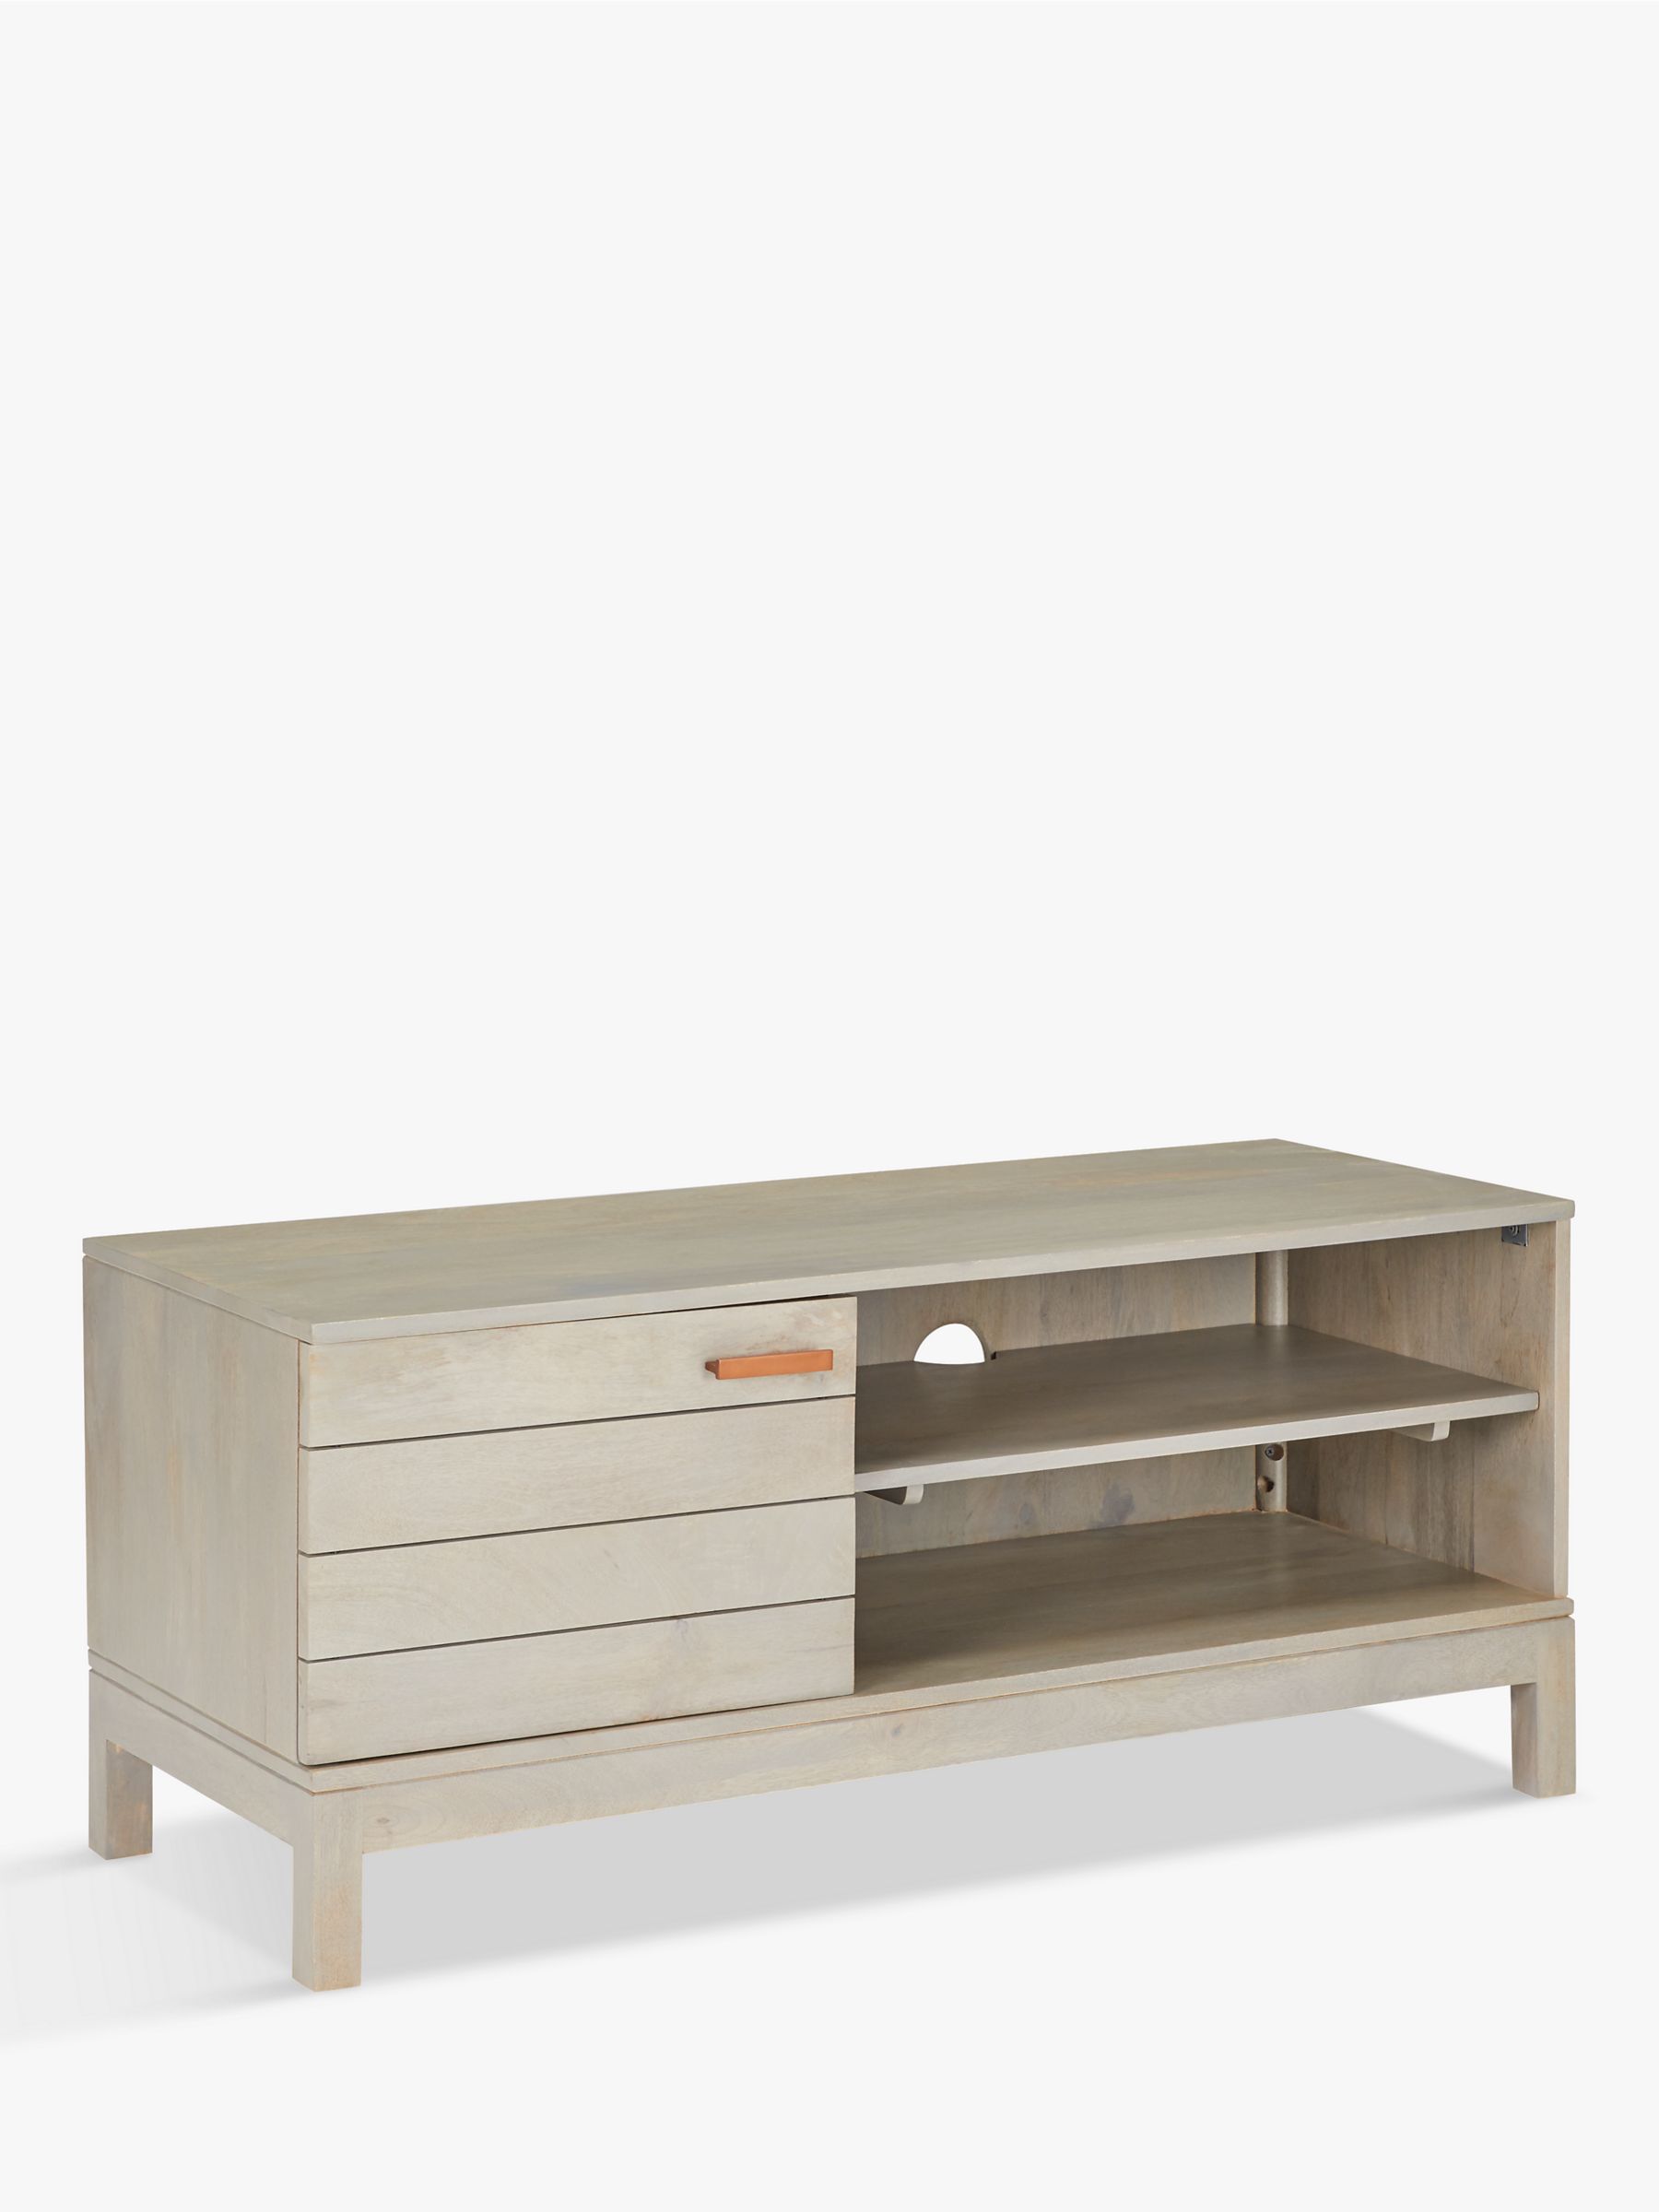 John Lewis & Partners Asha TV Stand for TVs up to 55